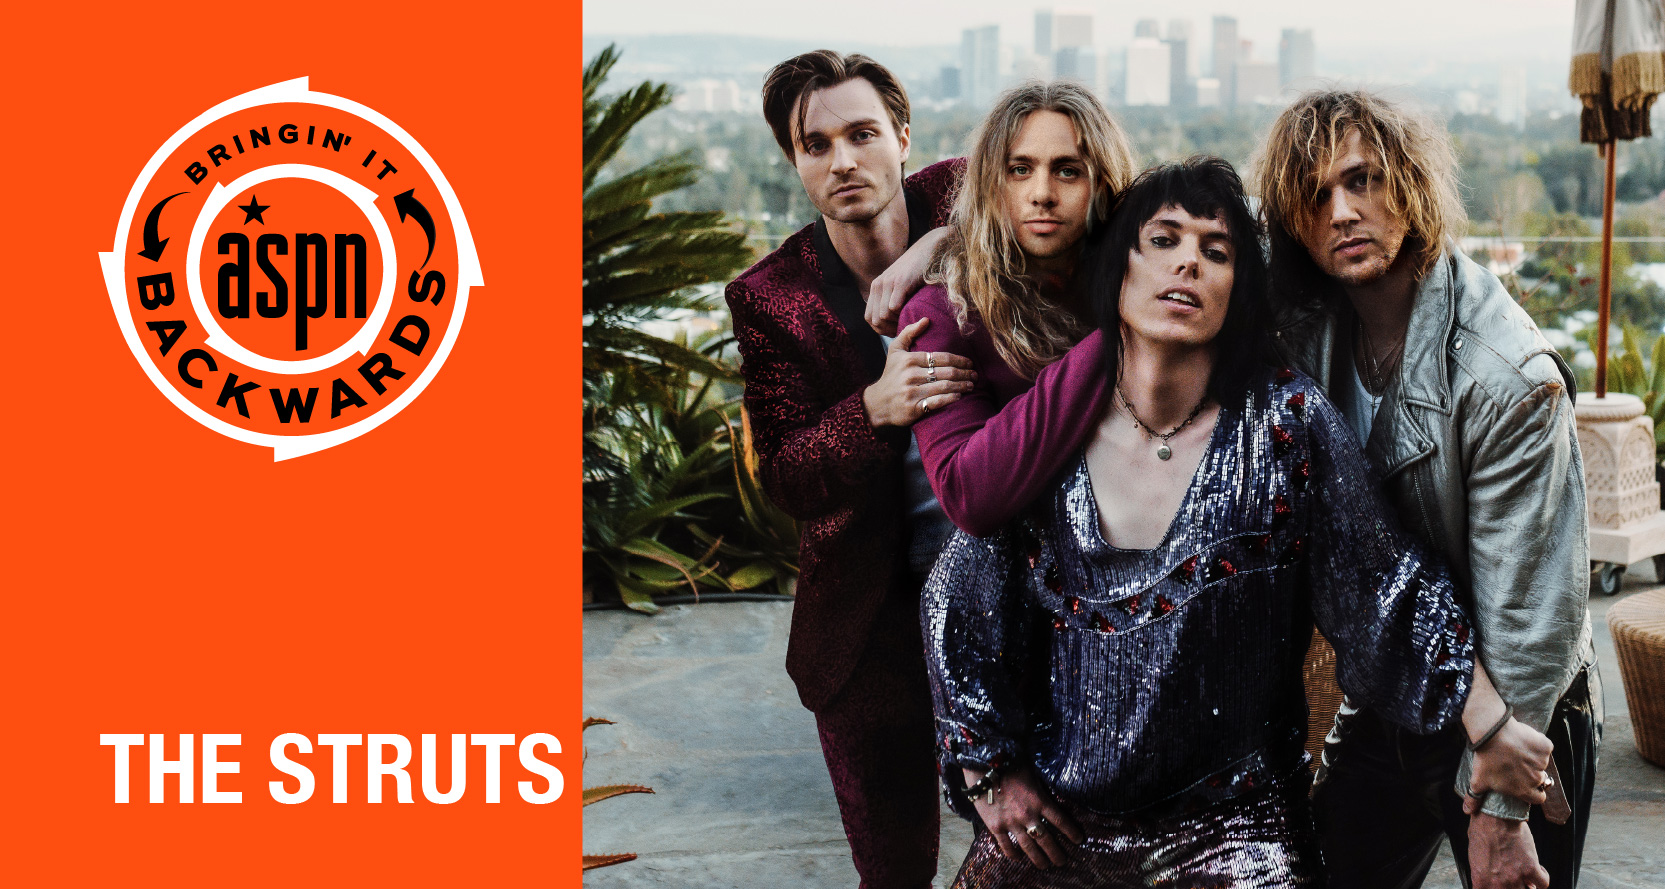 Bringin’ it Backwards: Interview with The Struts (Part 2)